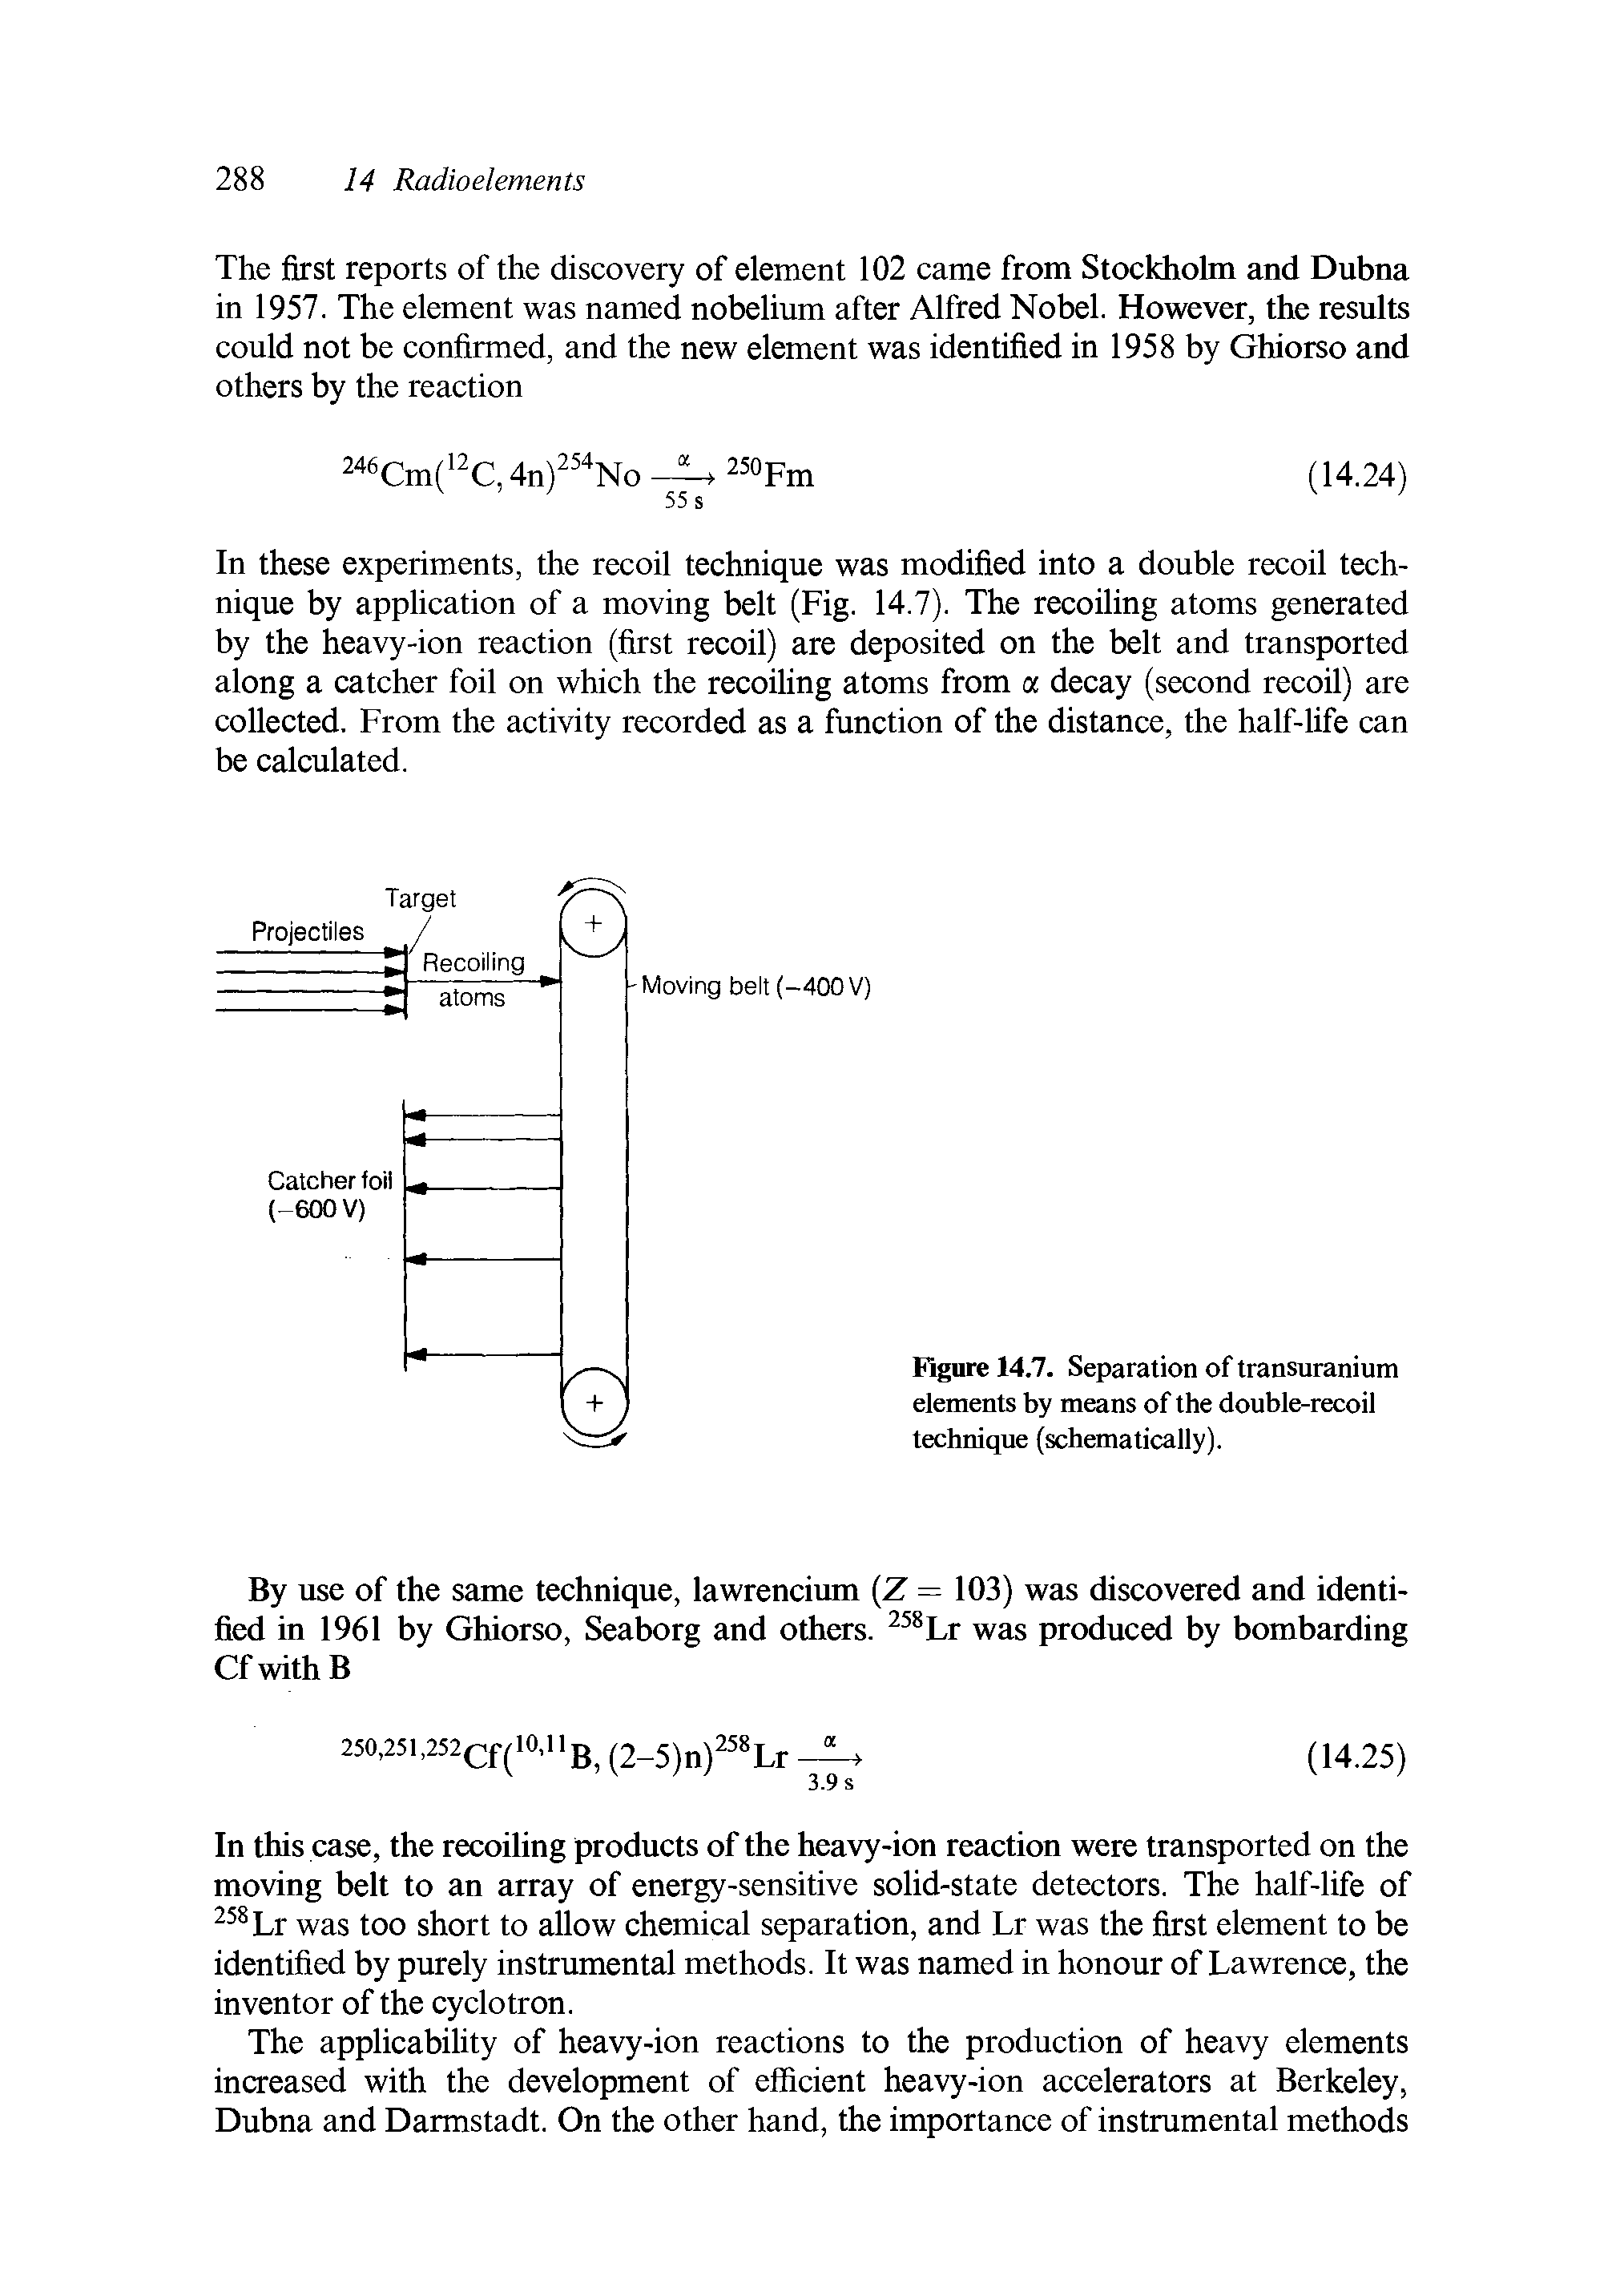 Figure 14.7. Separation of transuranium elements by means of the double-recoil technique (schematically).